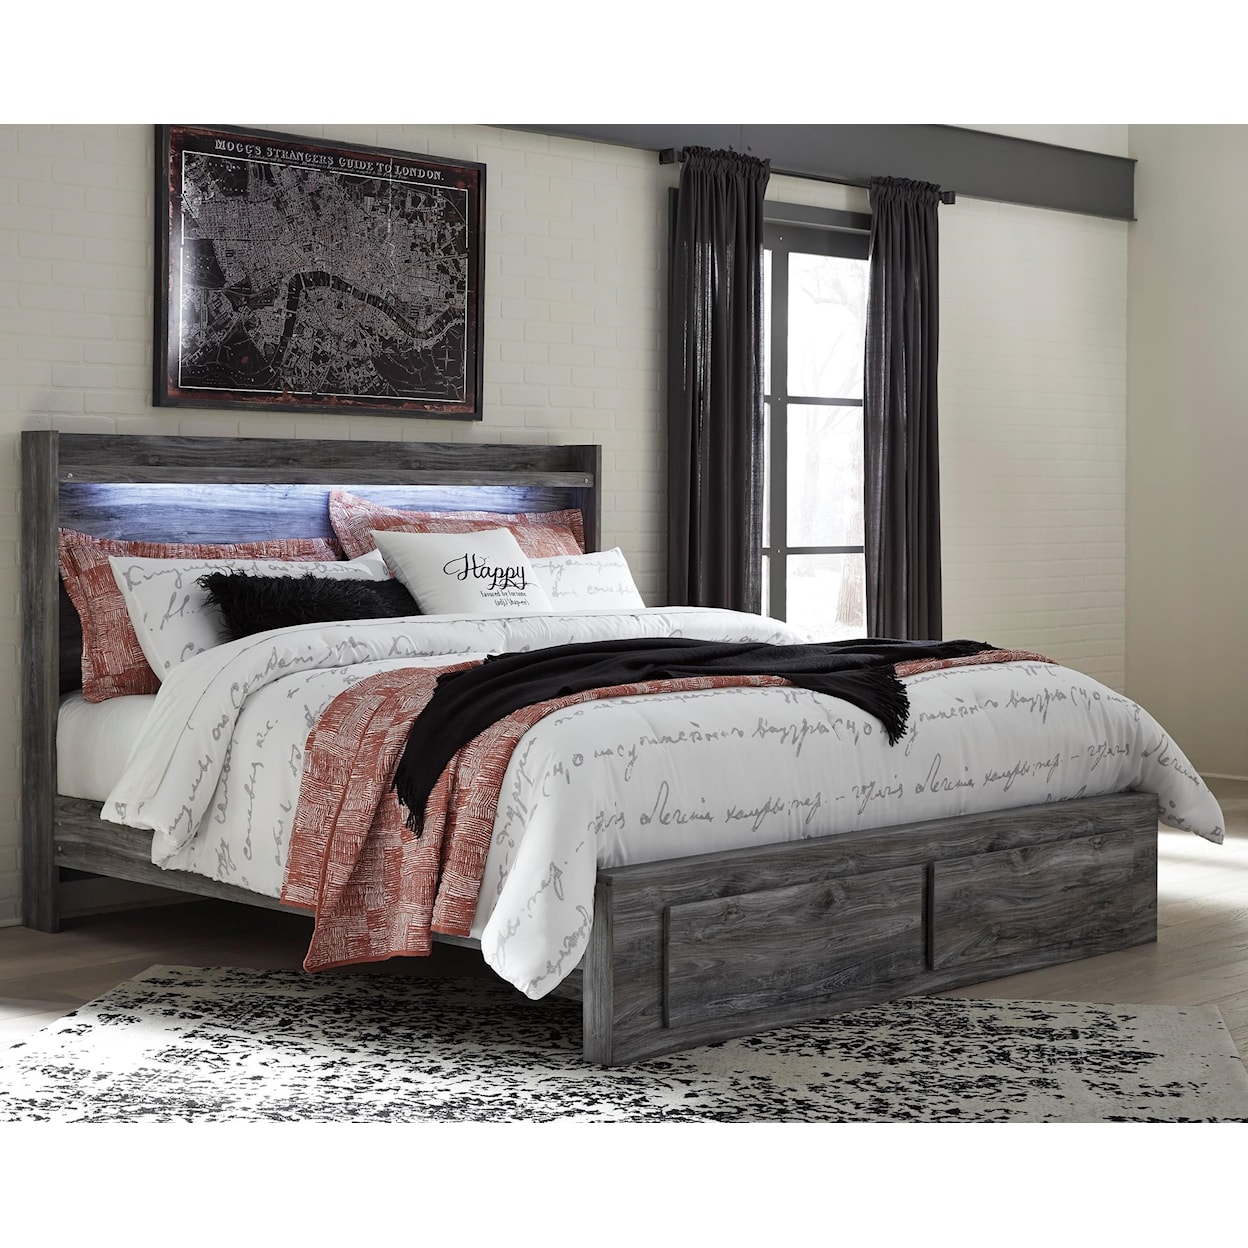 Signature Design by Ashley Furniture Baystorm King Panel Bed with Storage Footboard